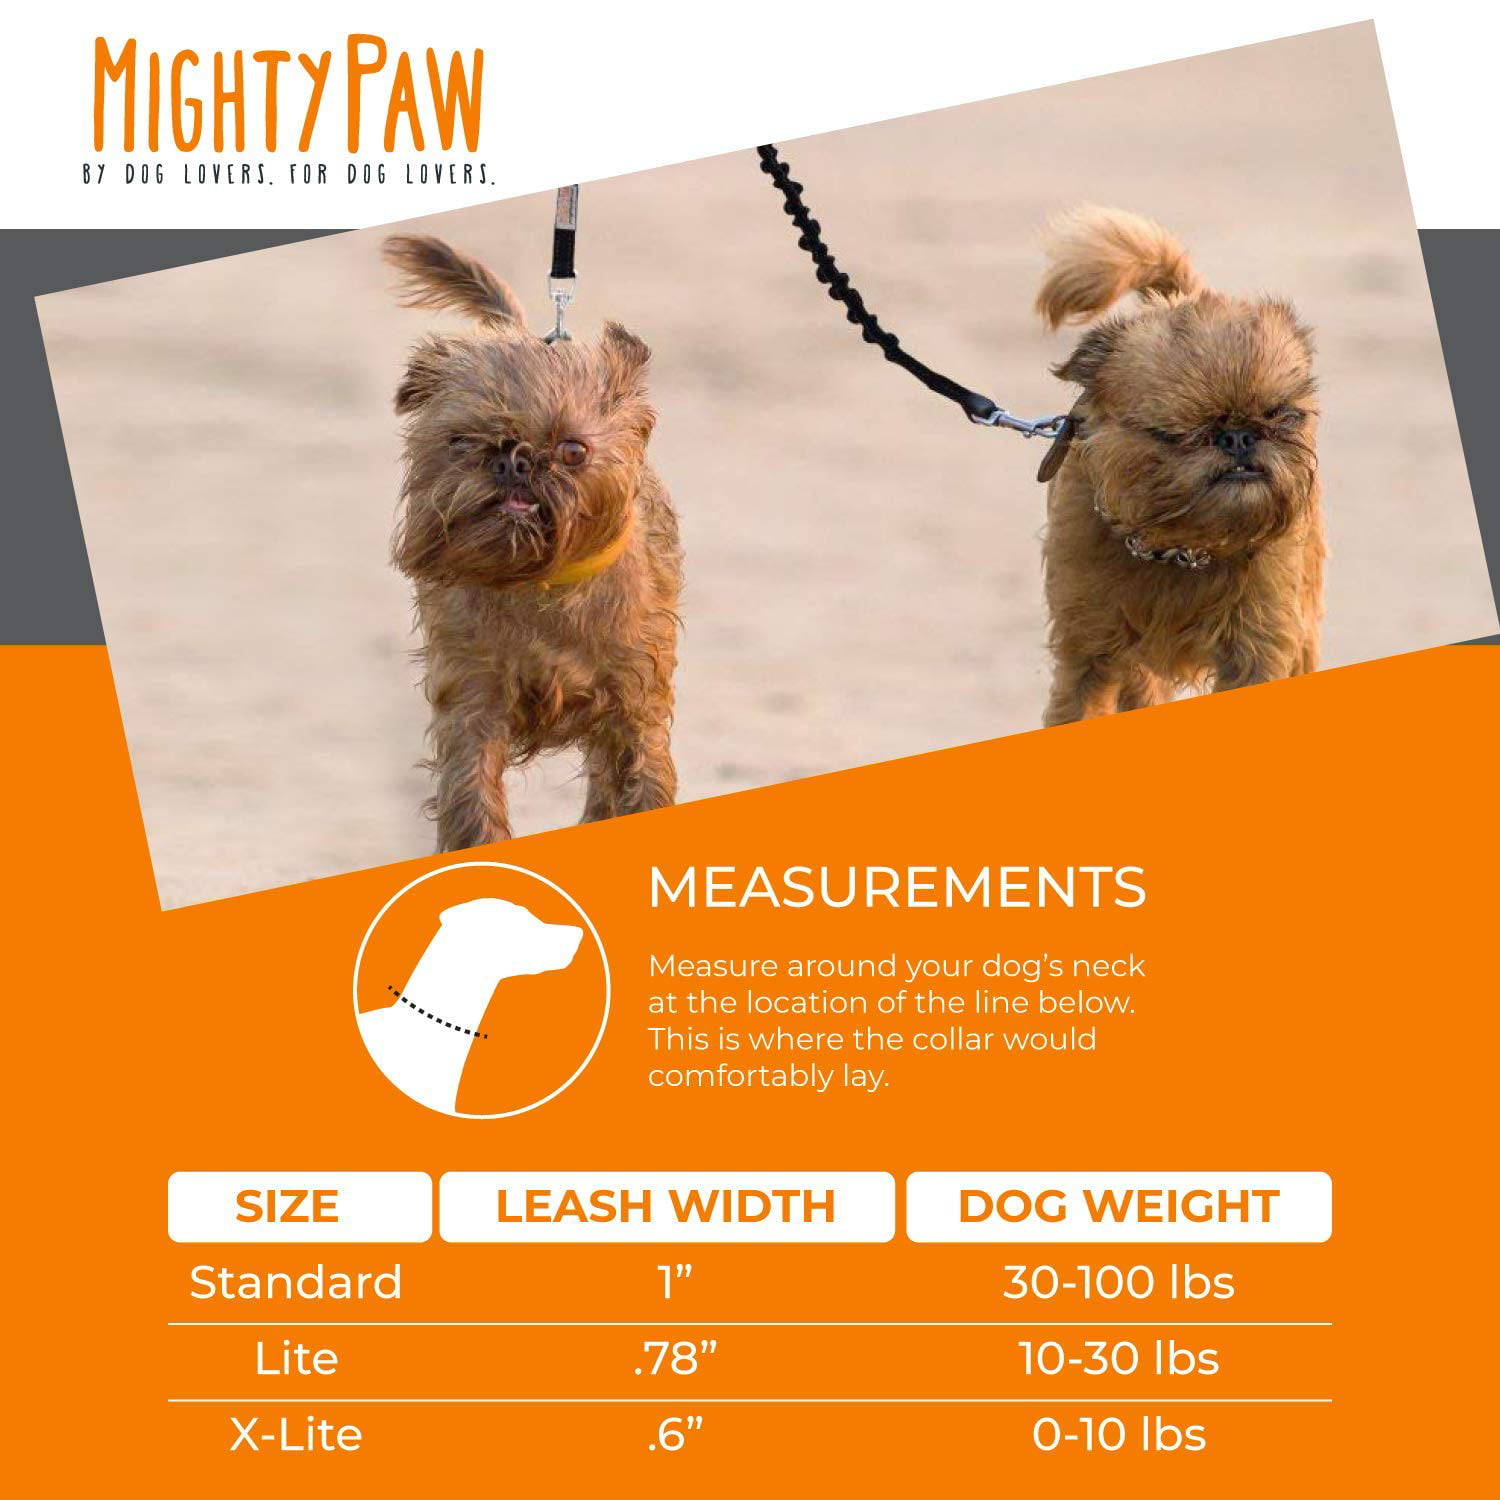 Mighty Paw BungeeX2 Double Dog Leash, Premium Quality Dog Leash, Comfort Force Absorbing Bungee Black